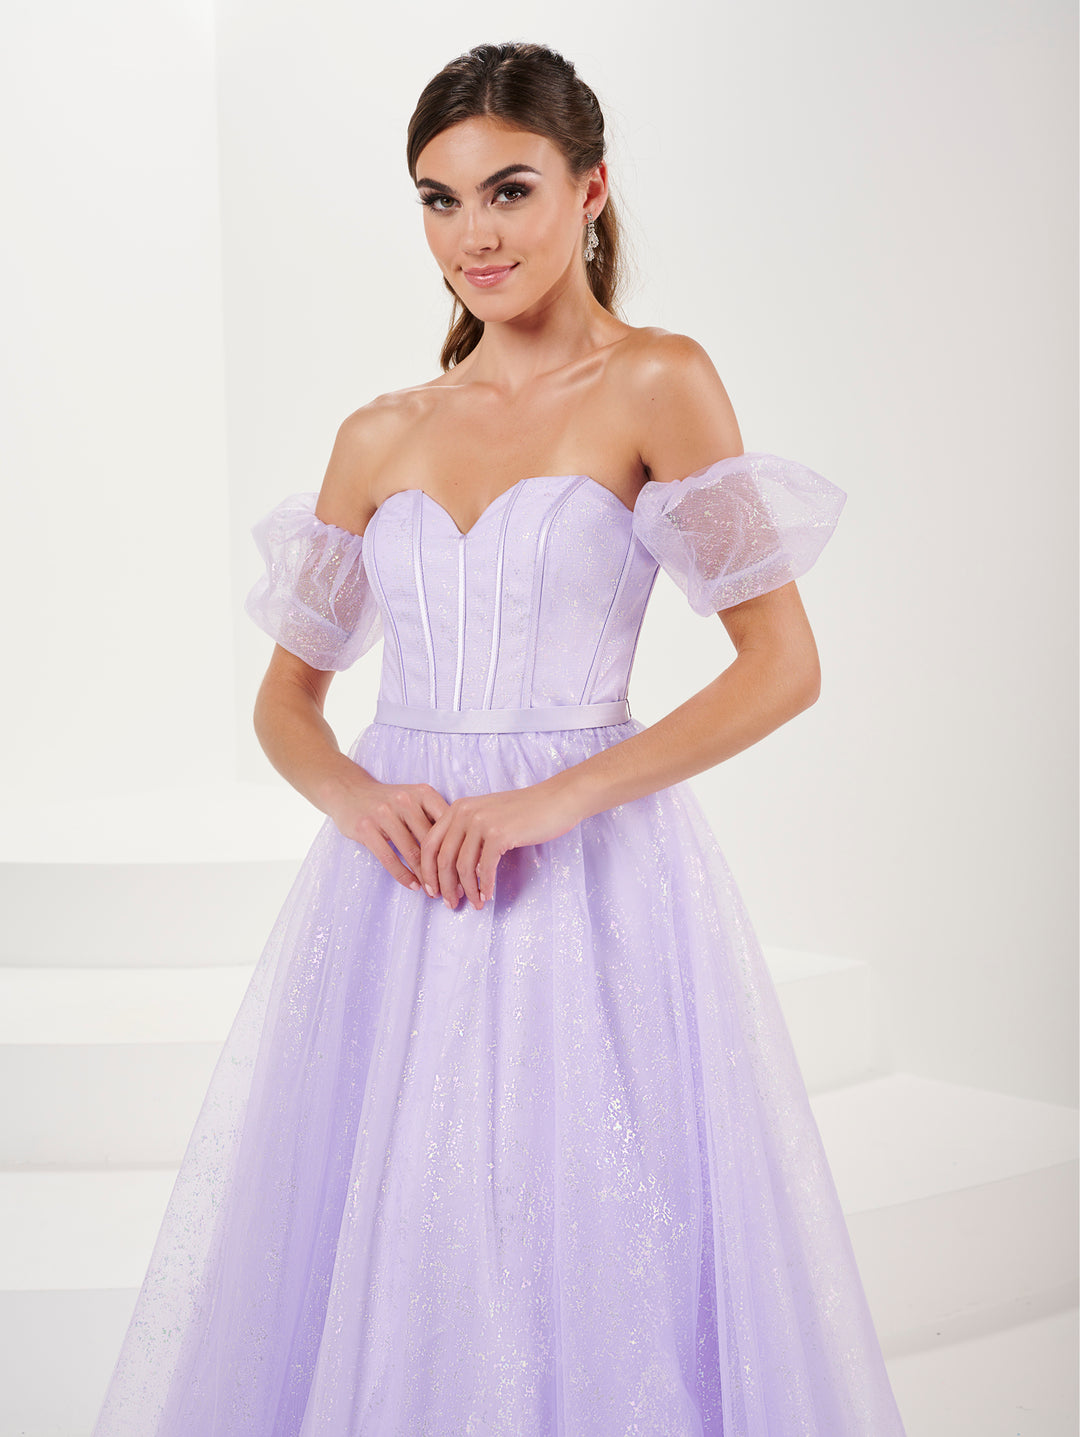 Glitter Strapless Puff Sleeve Gown by Tiffany Designs 16083